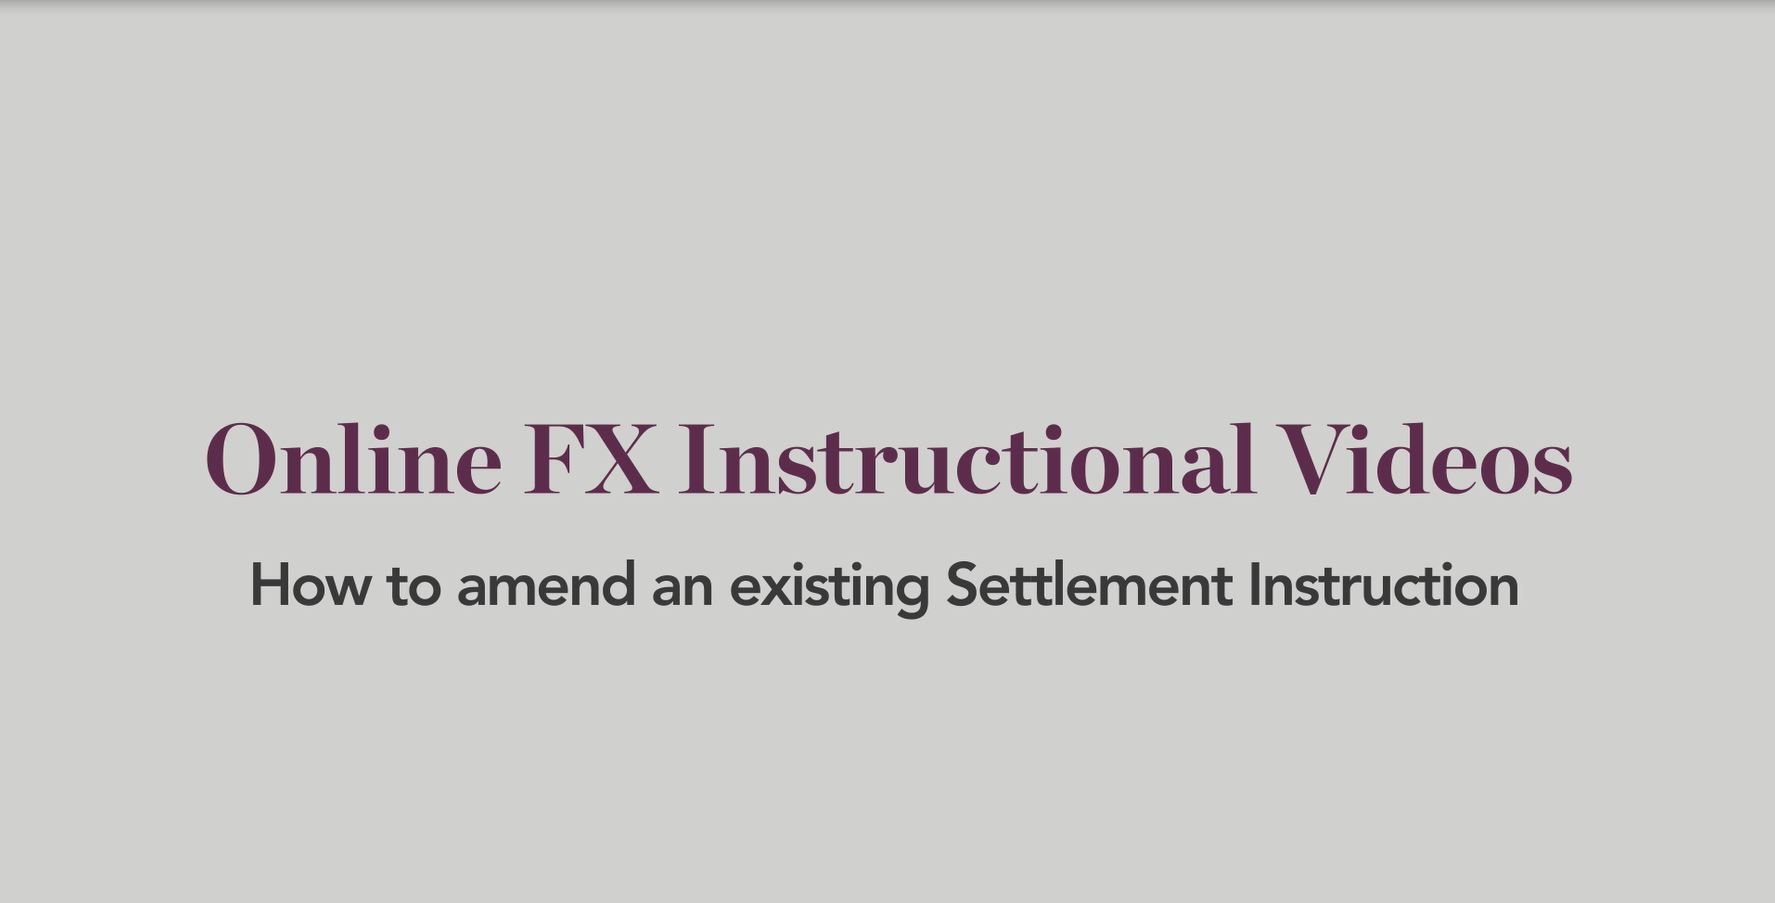 How to amend an Existing Settlement Instruction